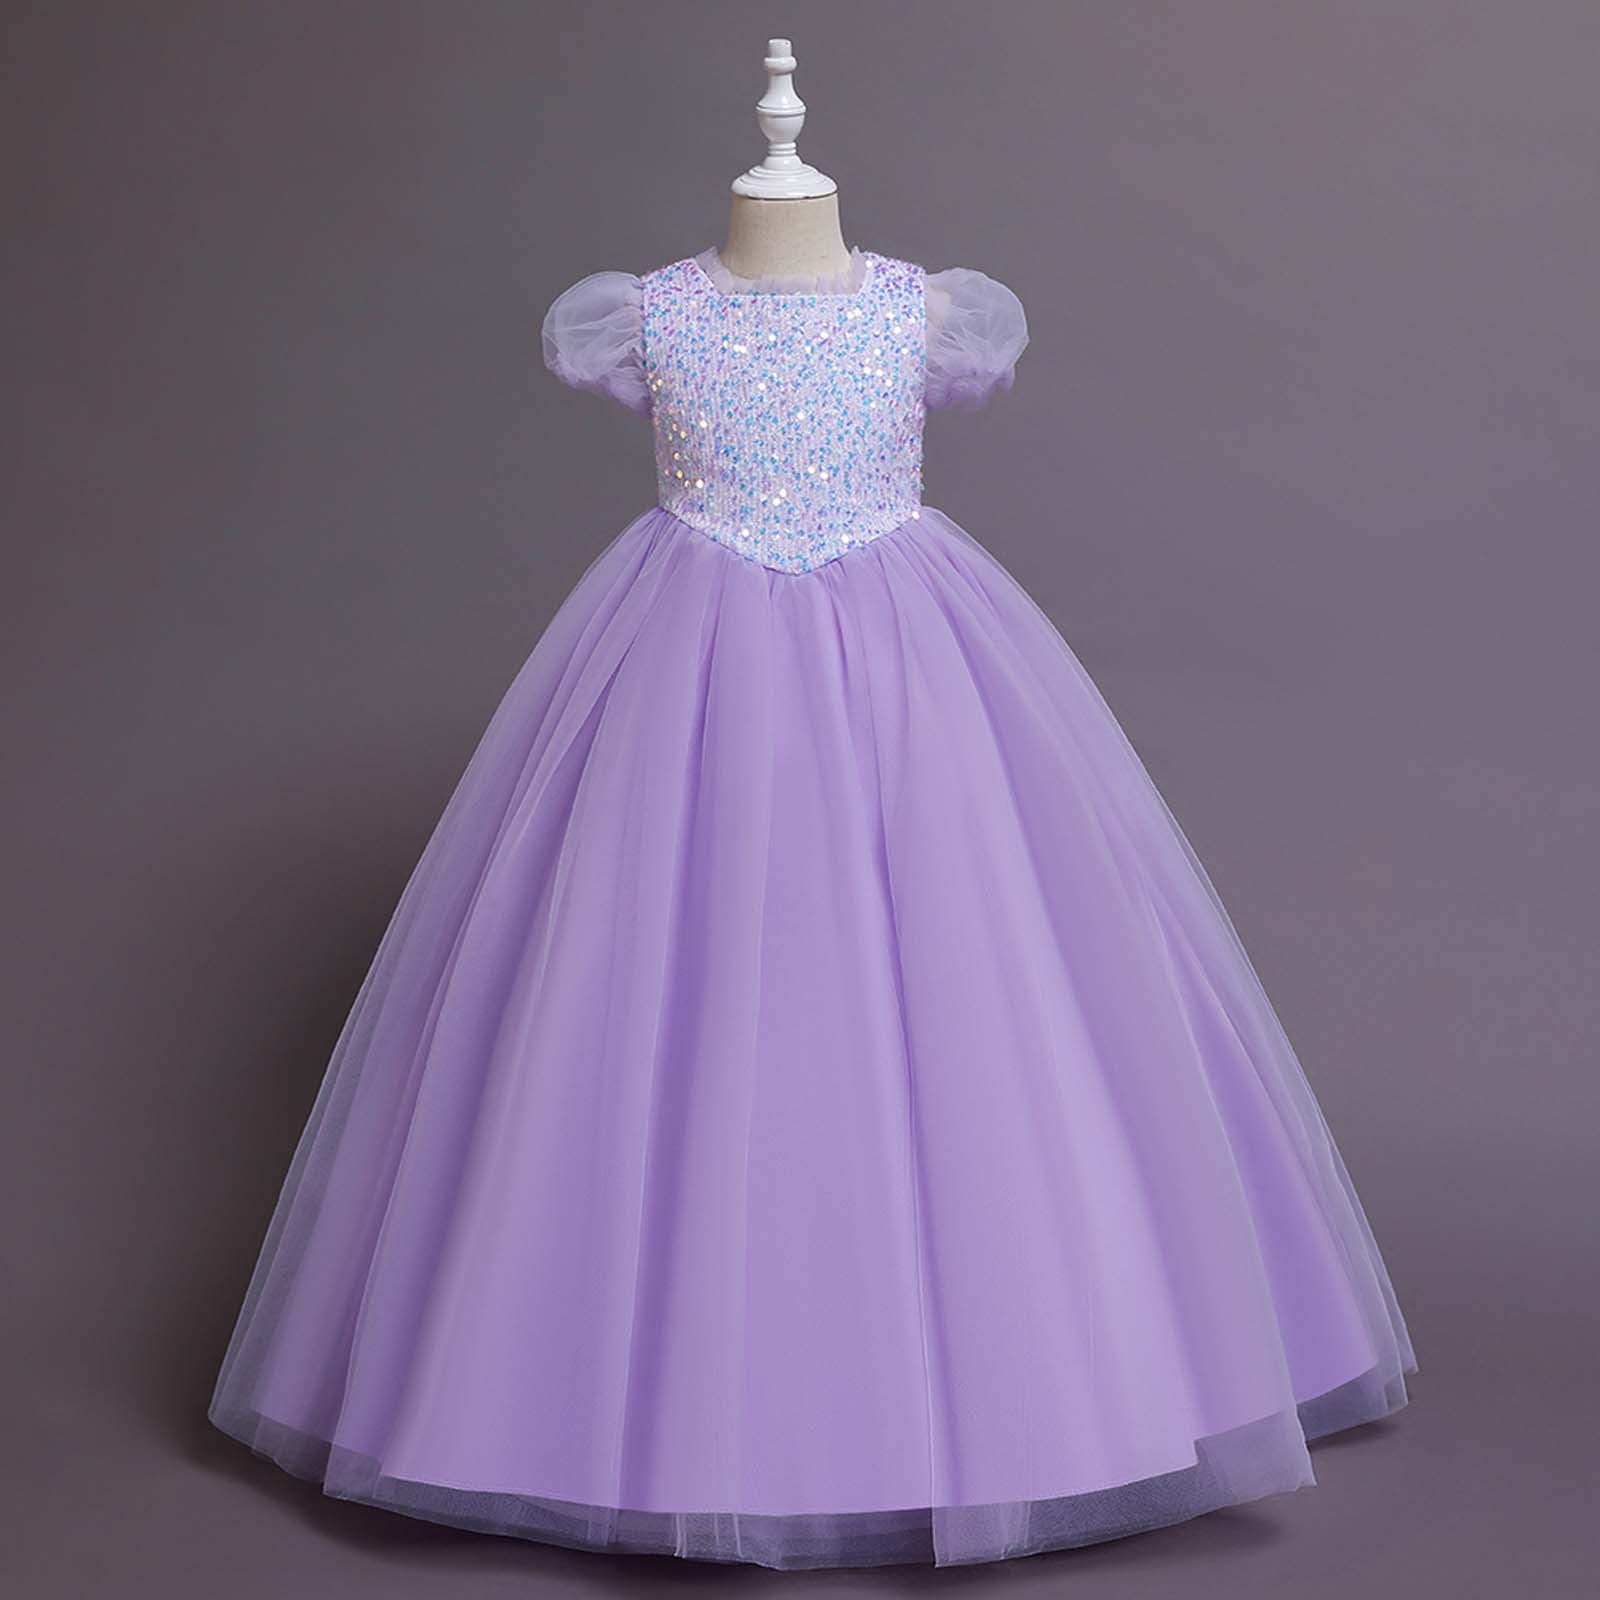 YWDJ 3-8Years Girls Dresses Solid Color Pearl Net Yarn Bowknot Birthday  Party Flowers Gown Kids Dresses Blue 4-5 Years - Walmart.com